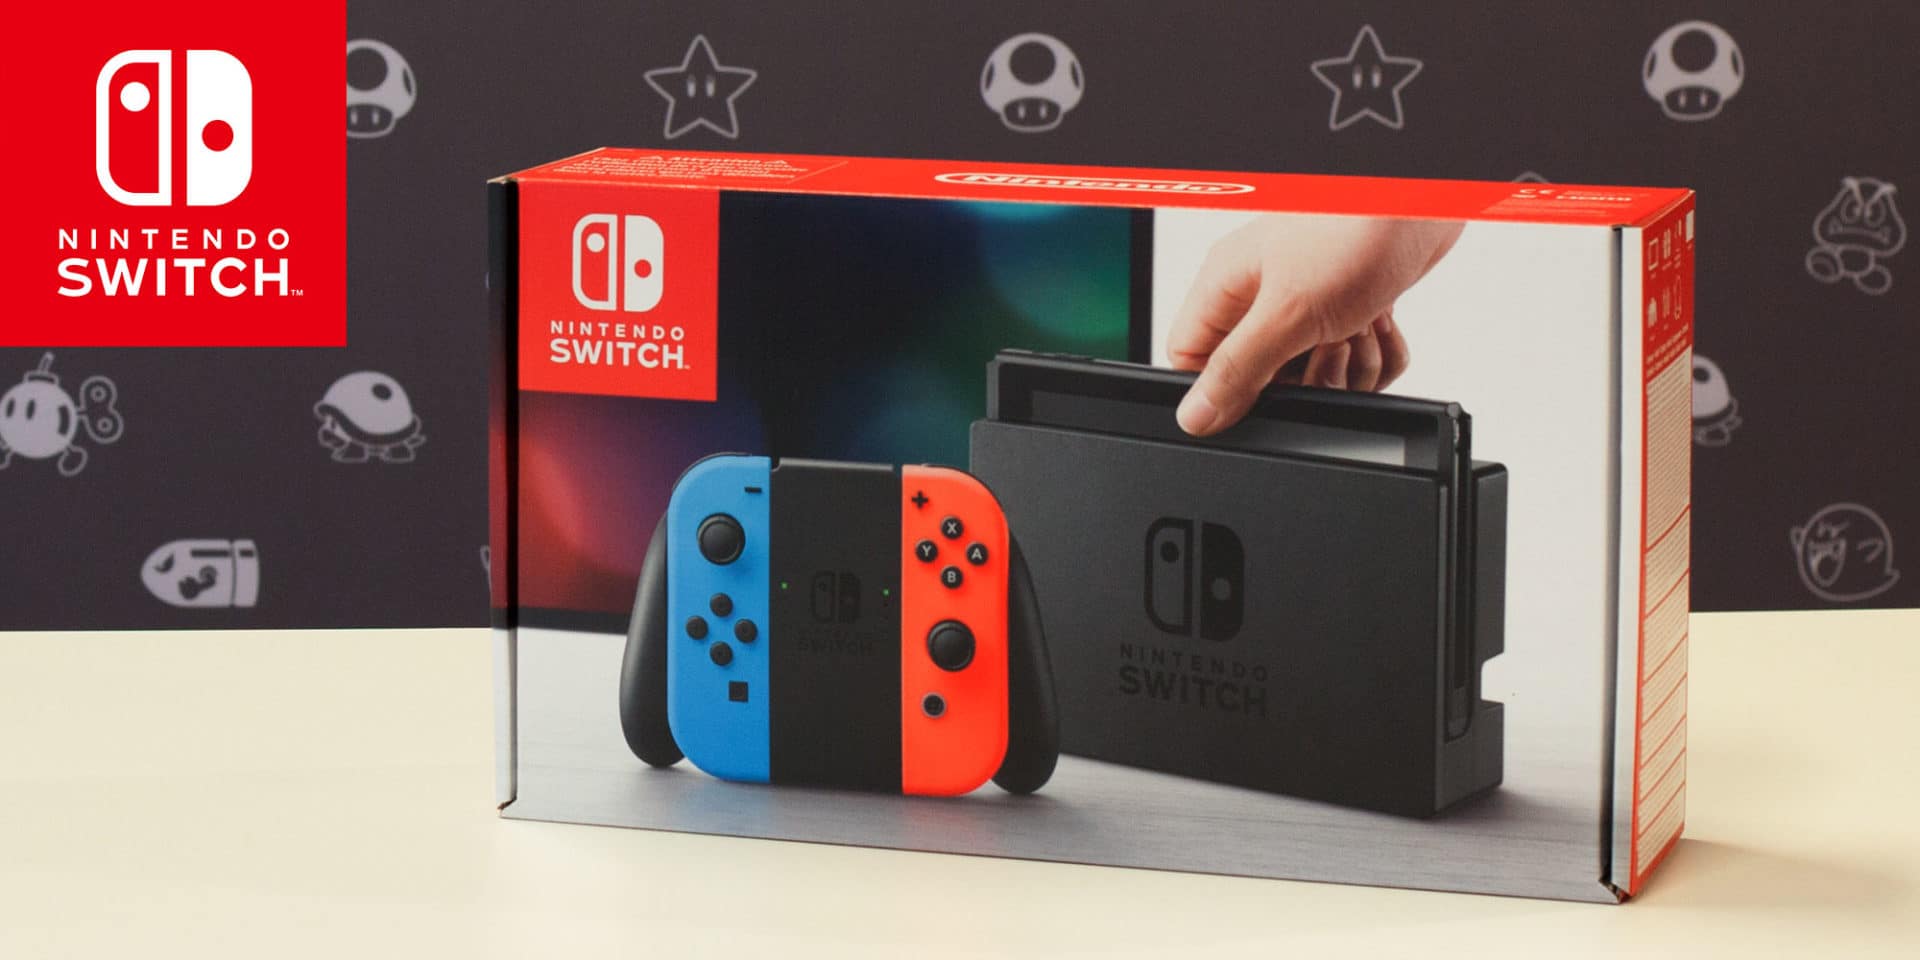 3.8 million + Nintendo Switch units sold in Japan